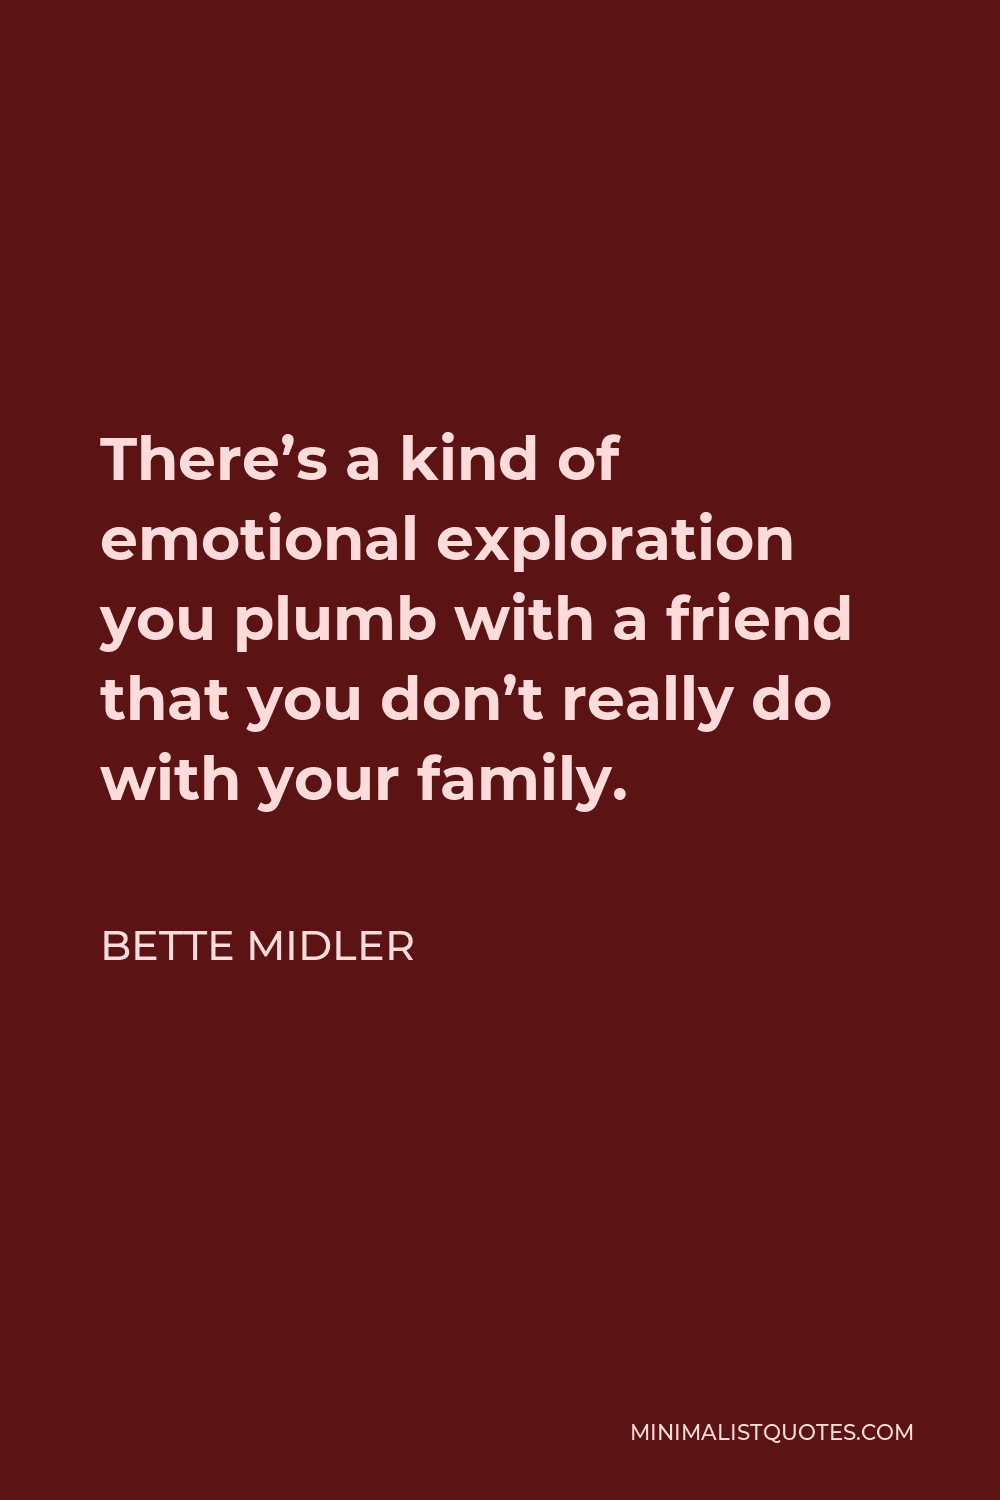 Bette Midler Quote - There’s a kind of emotional exploration you plumb with a friend that you don’t really do with your family.